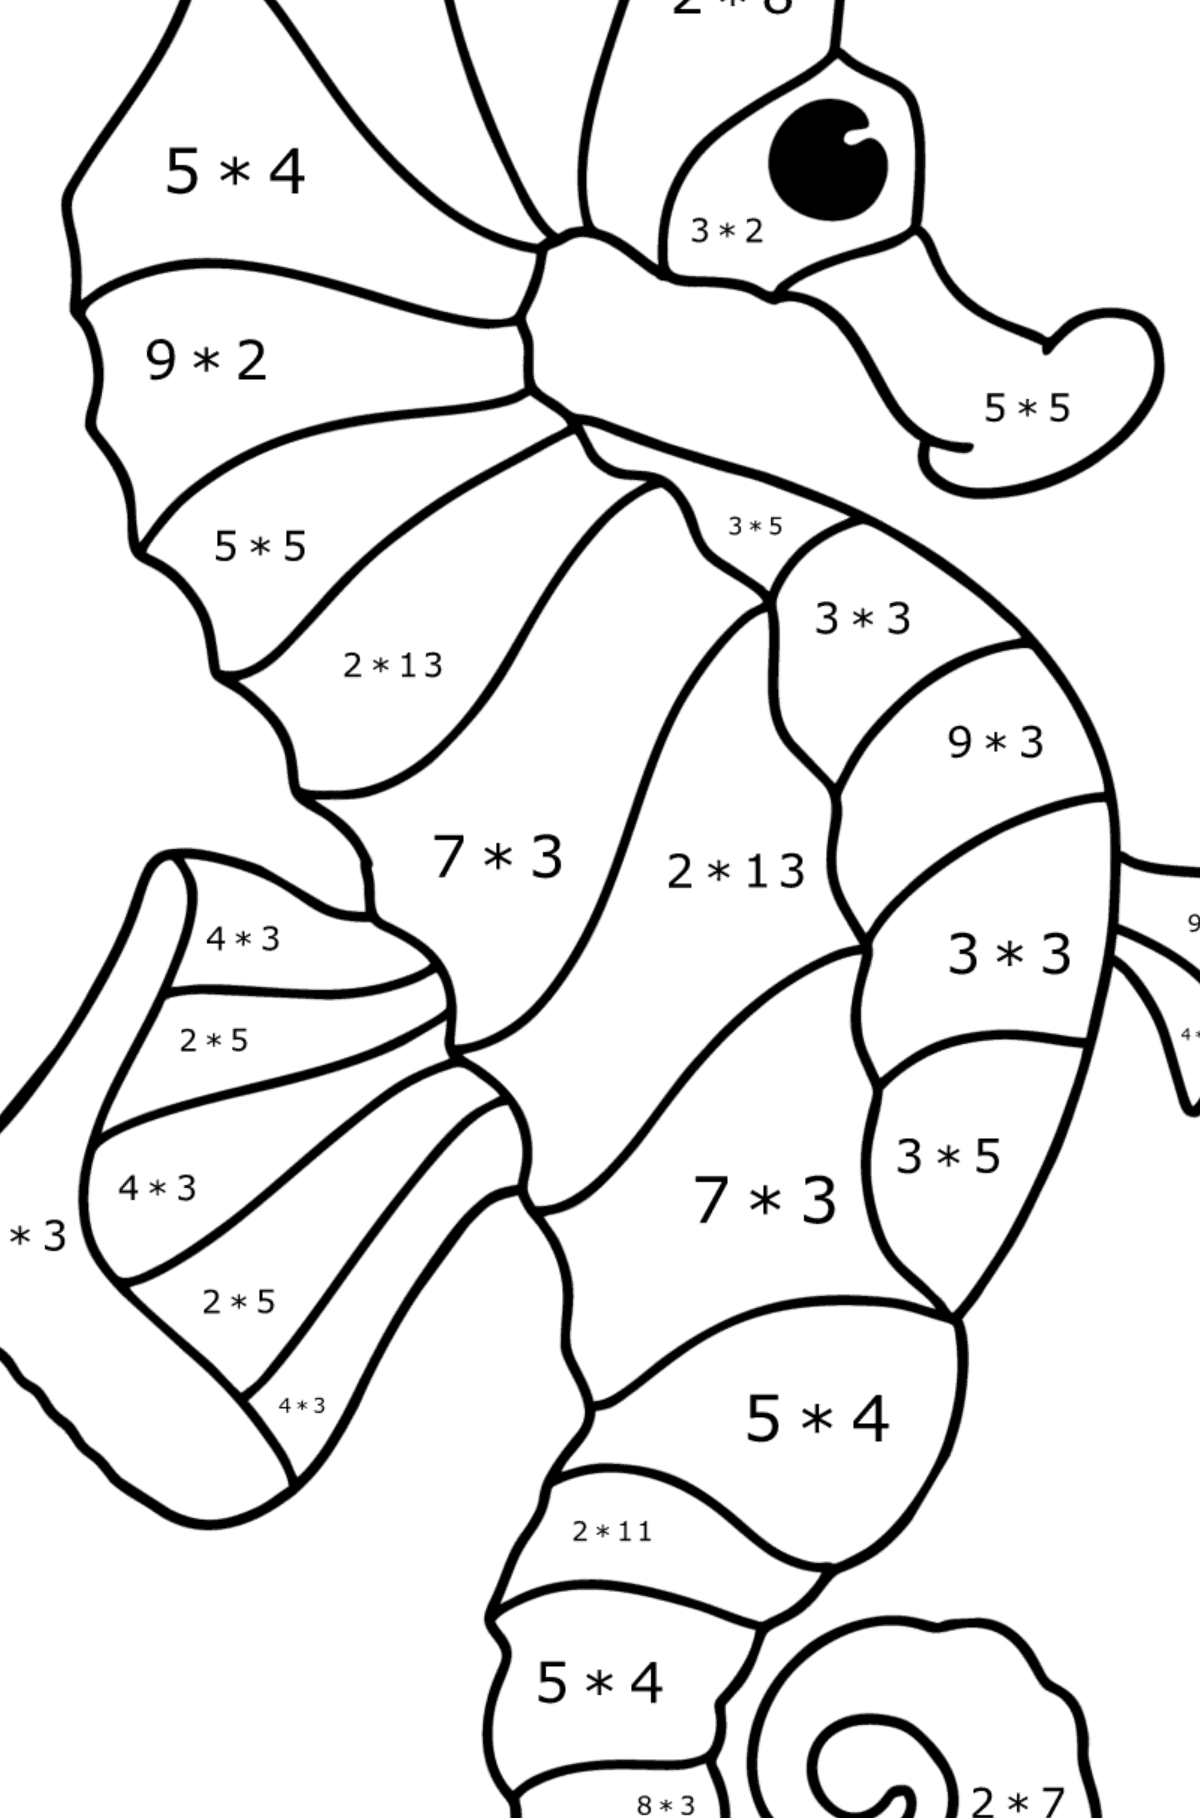 Sea Horse coloring page - Math Coloring - Multiplication for Kids